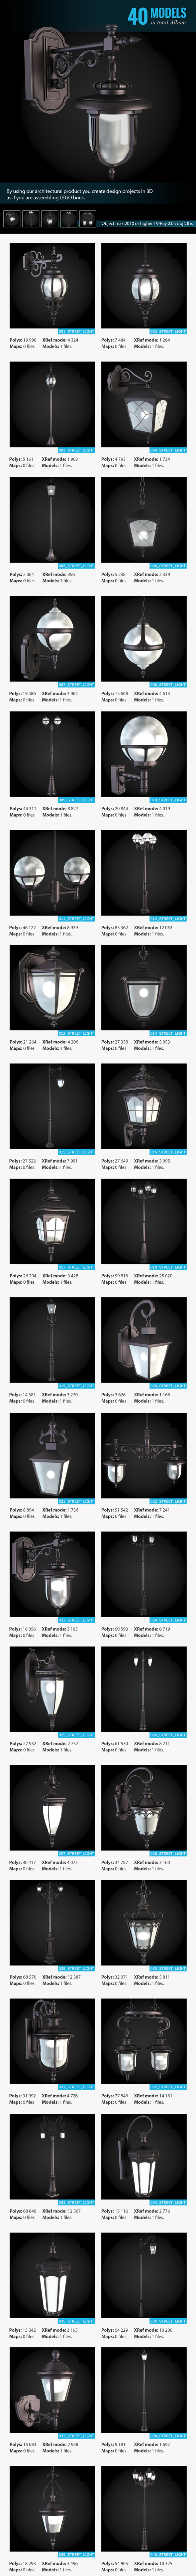 Street Lights Collection - 3Docean 6652802